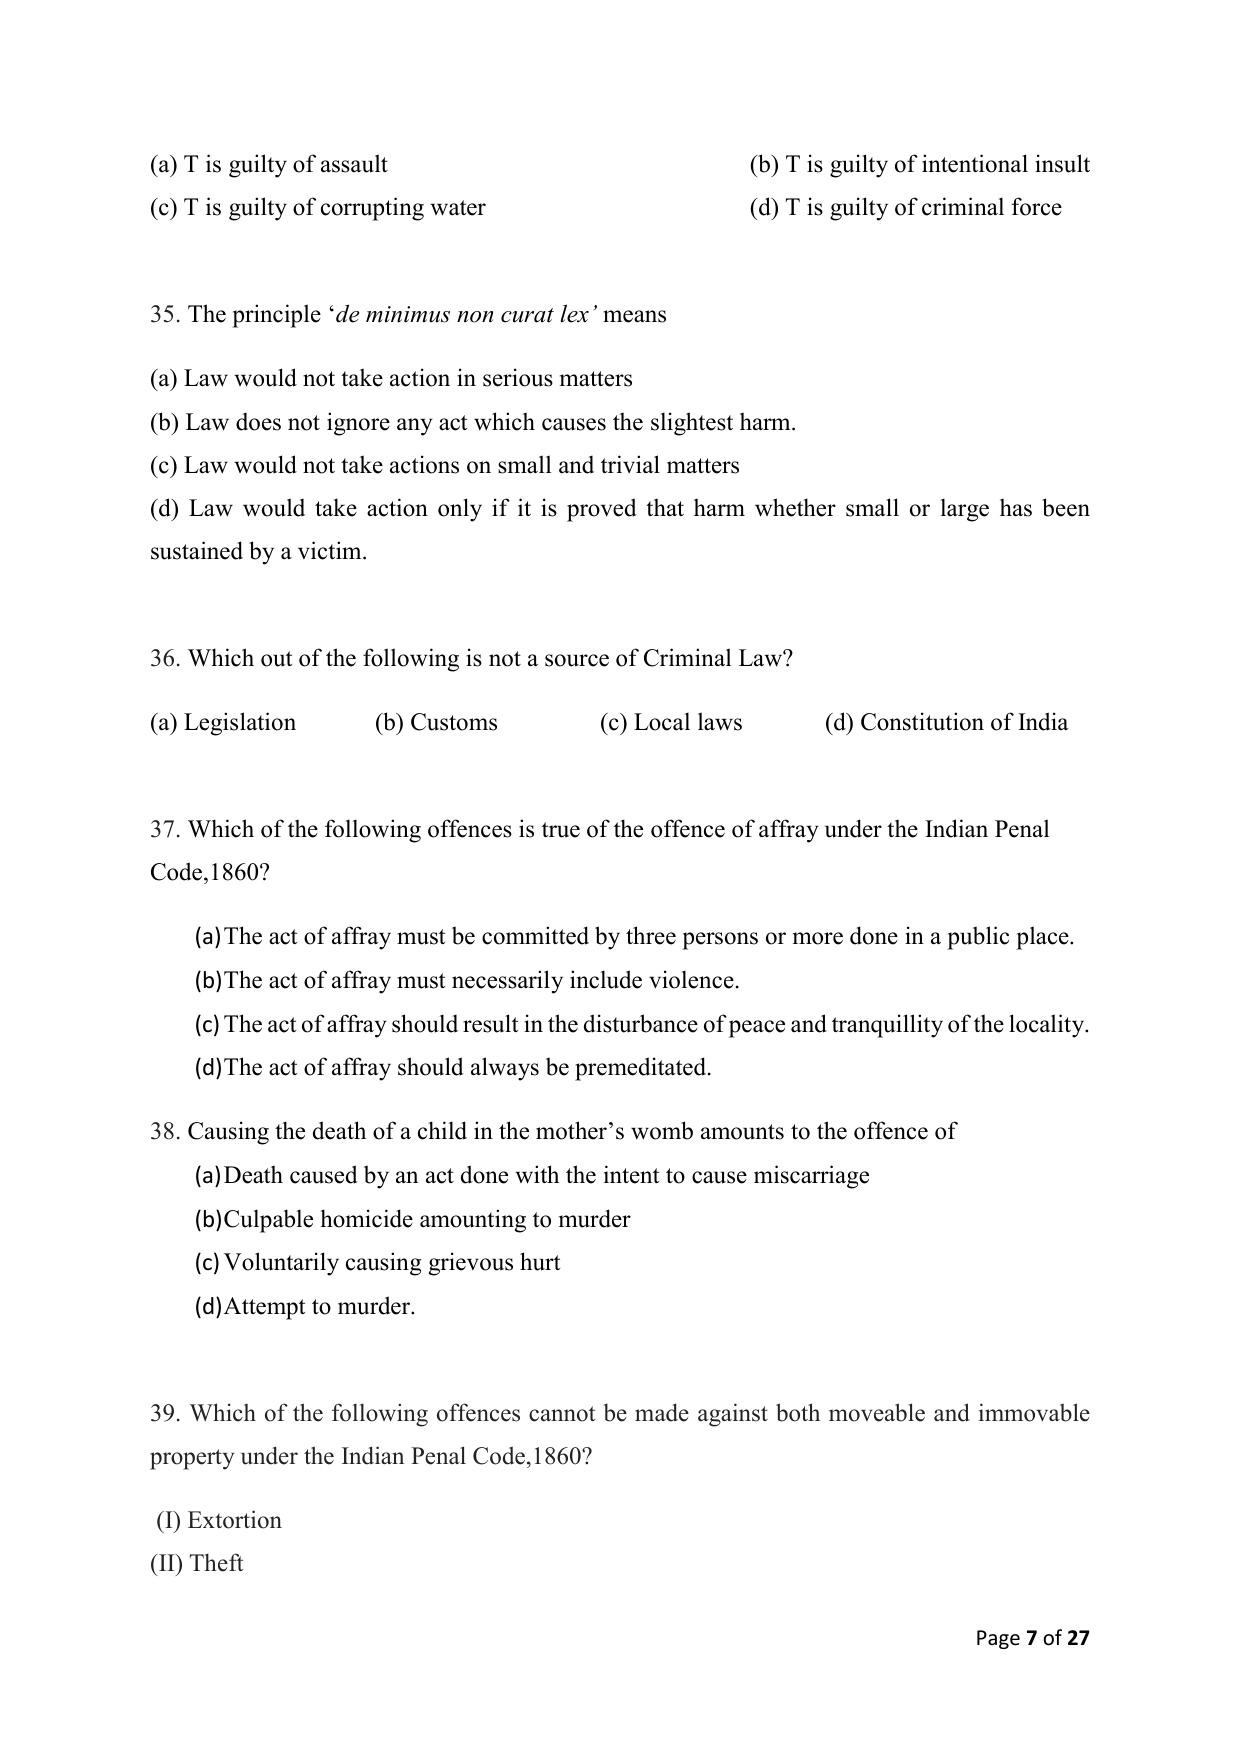 AILET 2020 Question Paper for LLM - Page 7